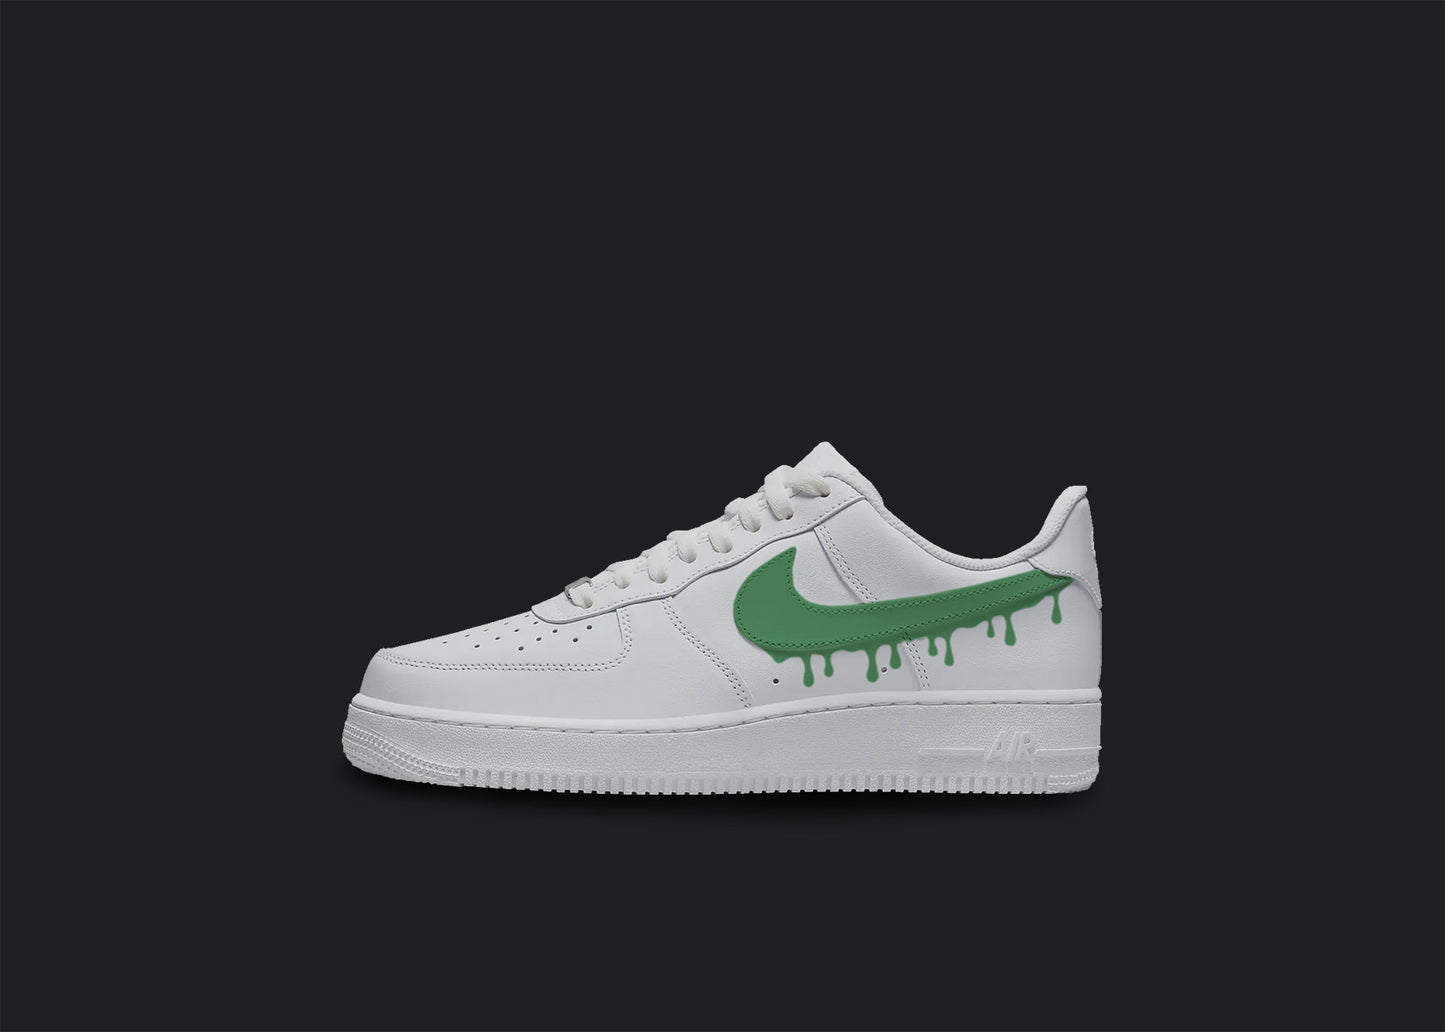 The image is of a Custom Nike Air force 1 sneaker on a blank black background. The white custom sneaker has a Green drip logo design.